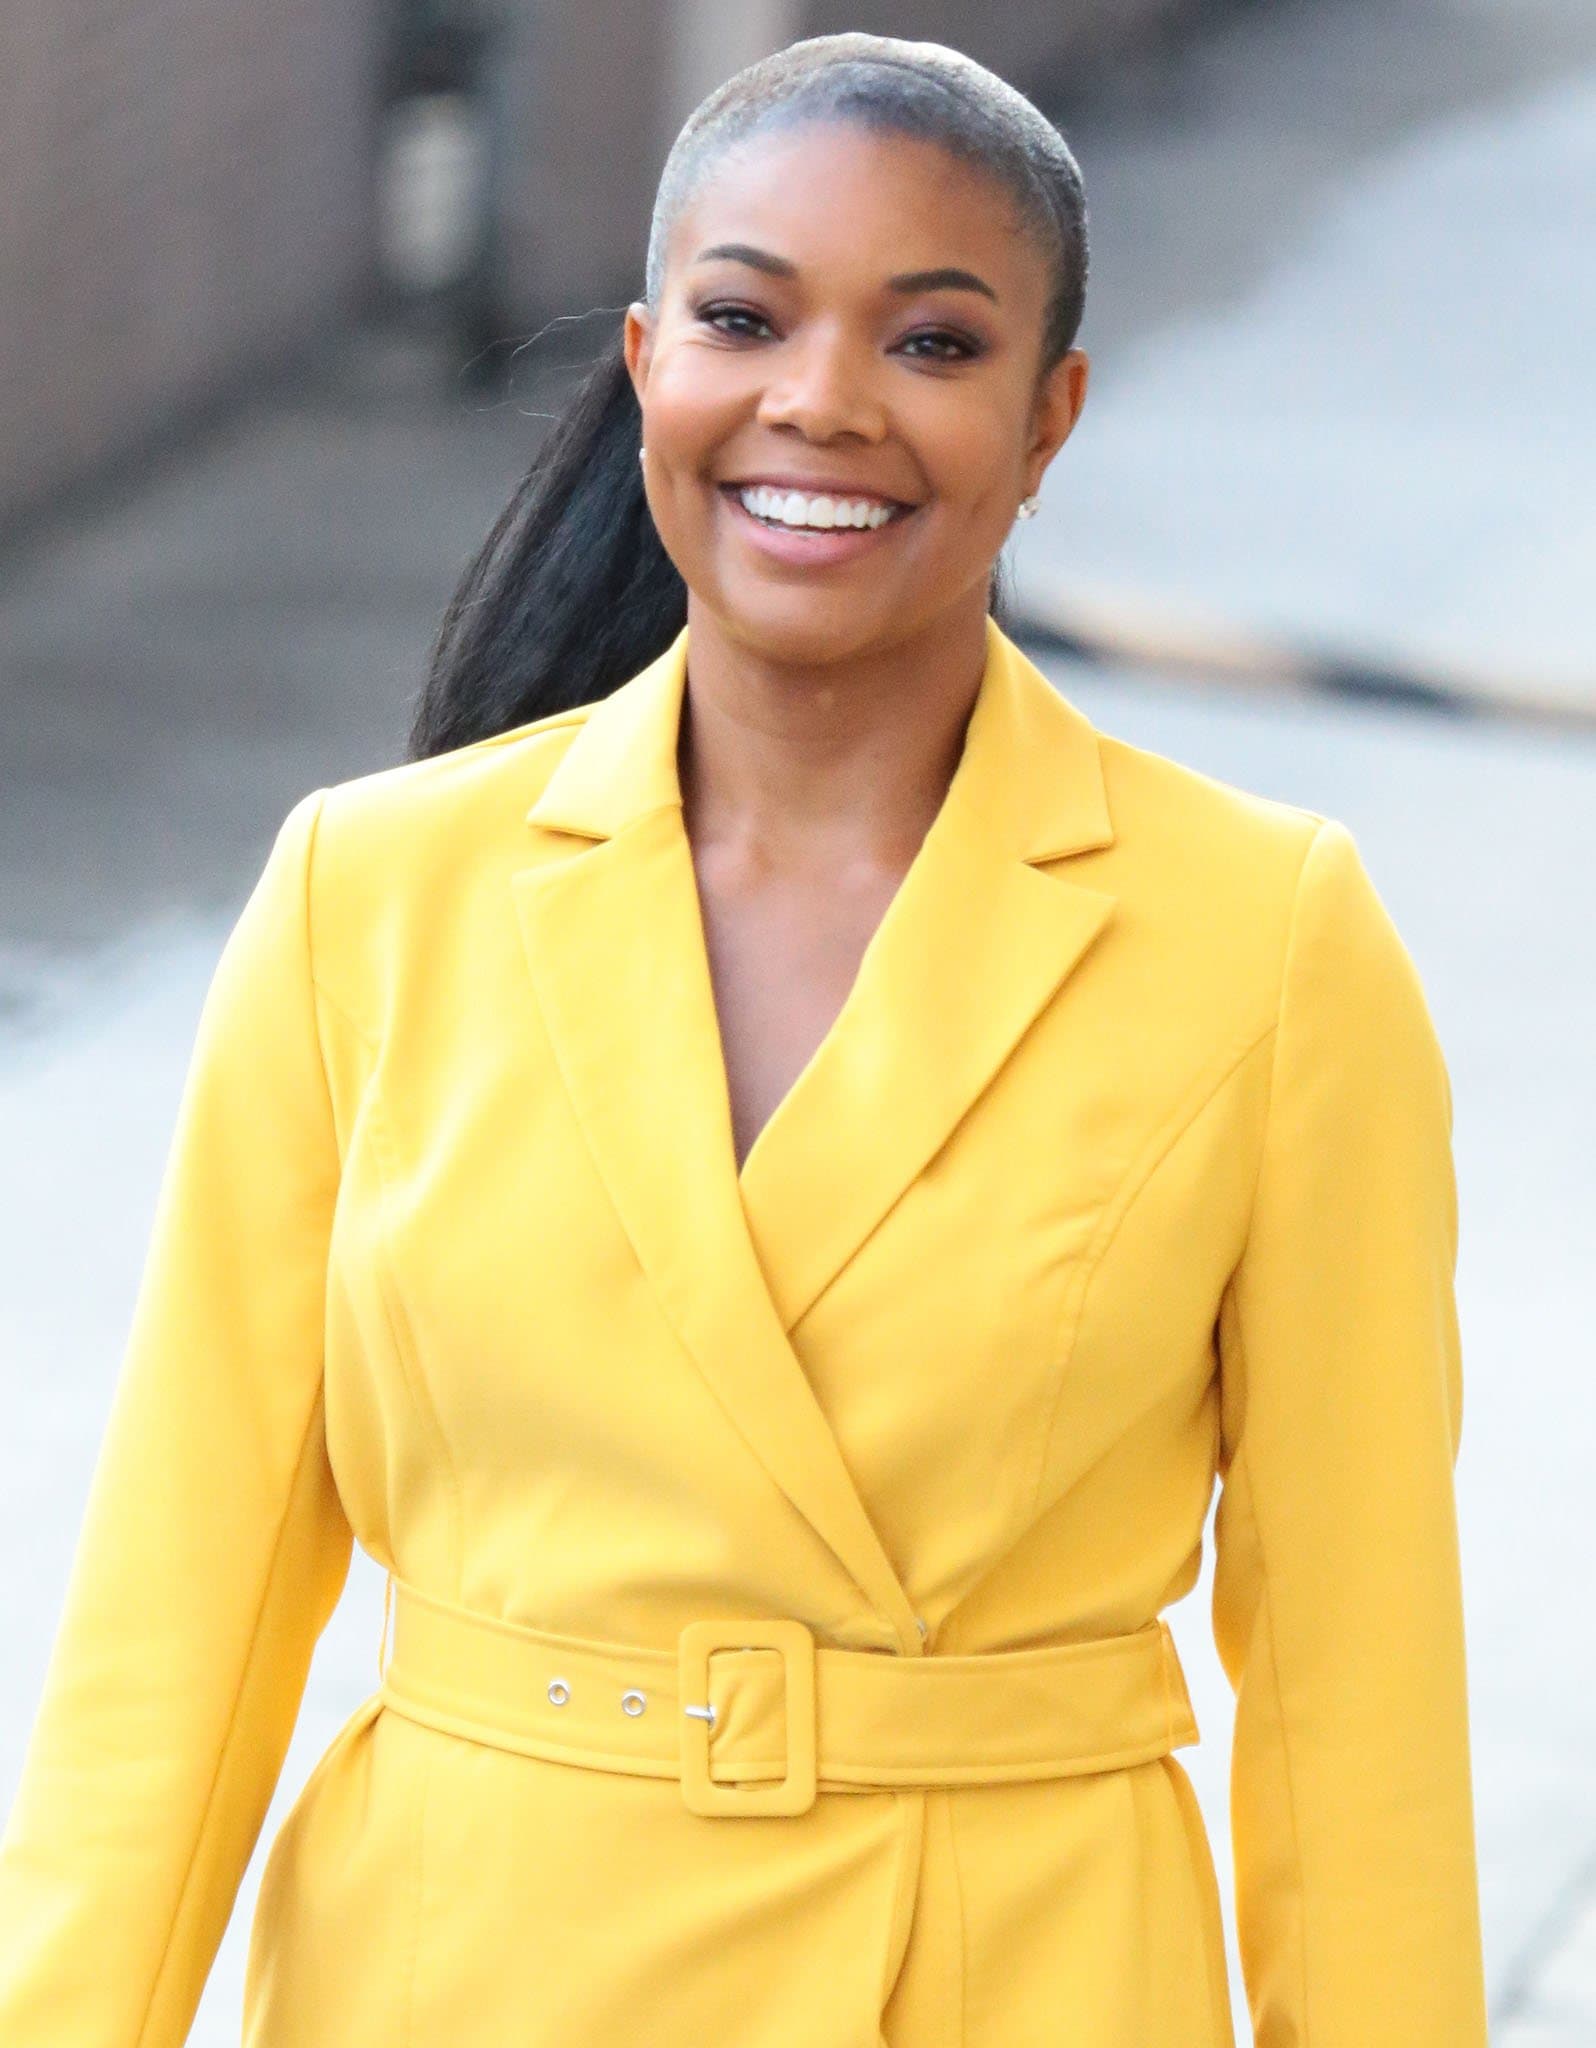 Gabrielle Union wears subtle smokey eye-makeup with nude lipstick and a high ponytail